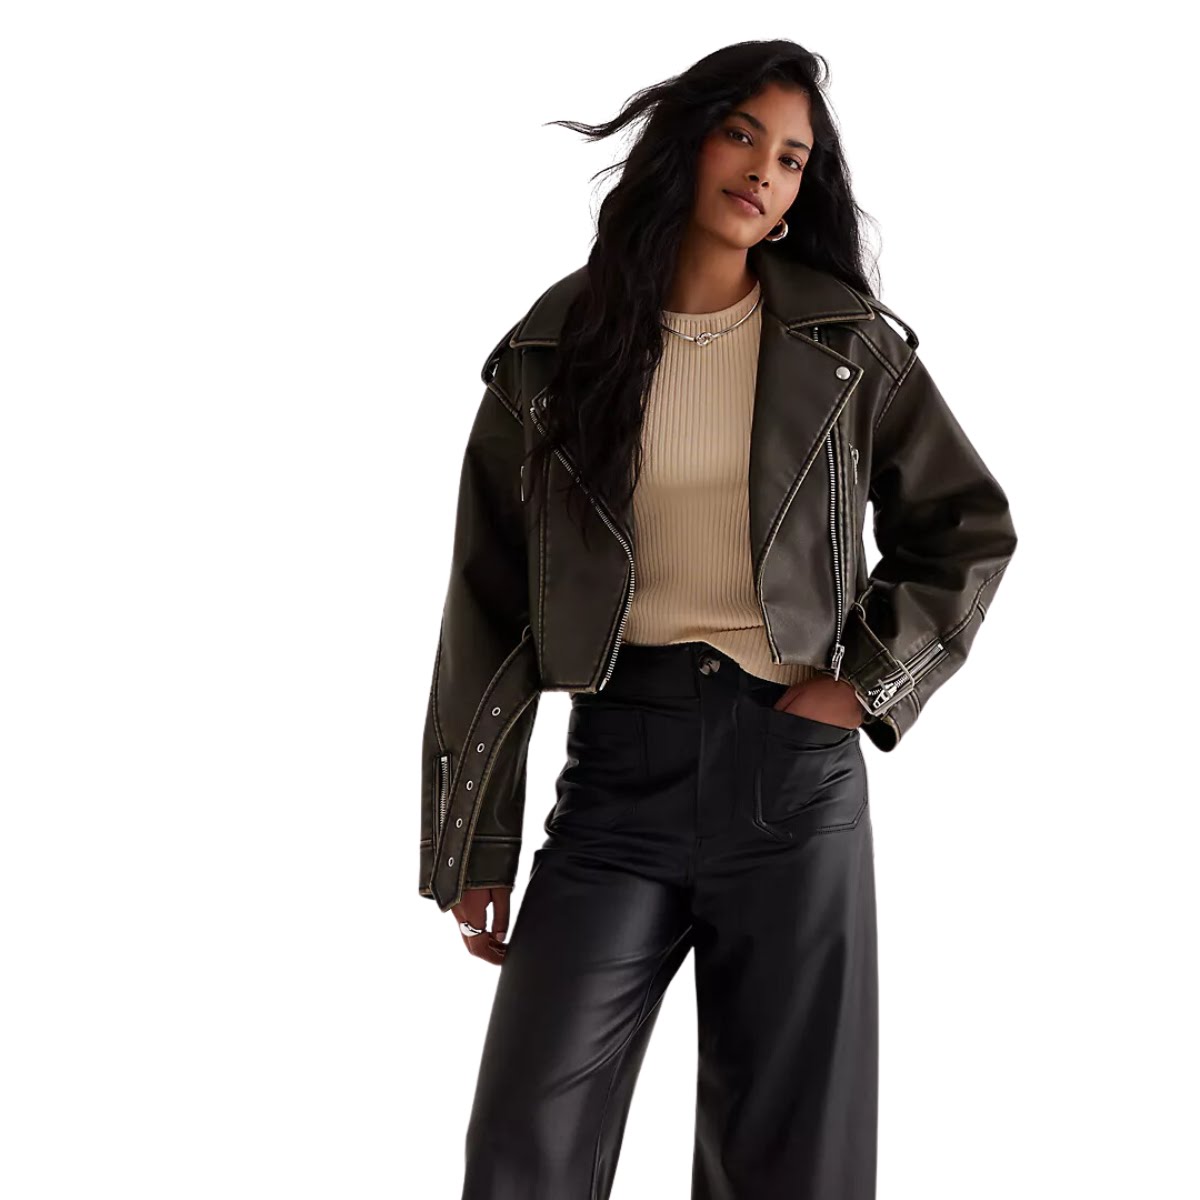 Maeve The Colette Cropped Vegan Leather Trousers, €140